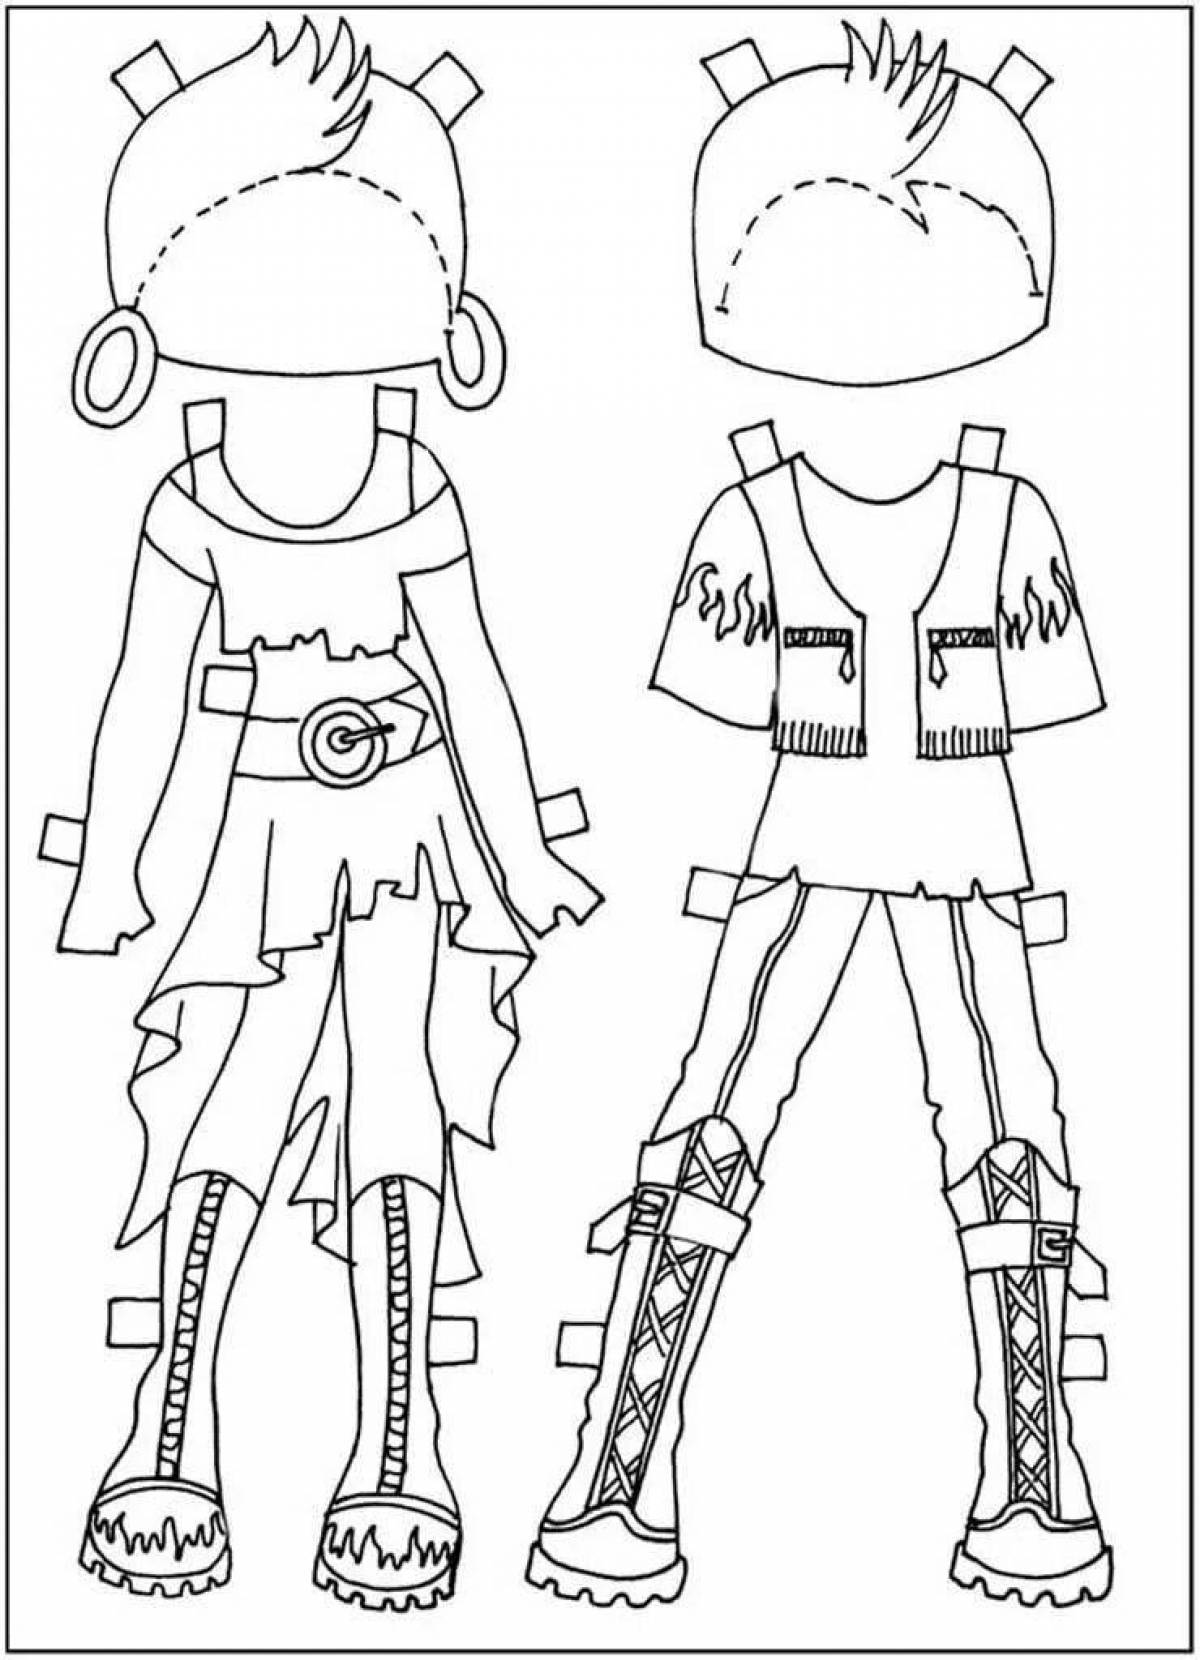 Coloring page cute puppet boy